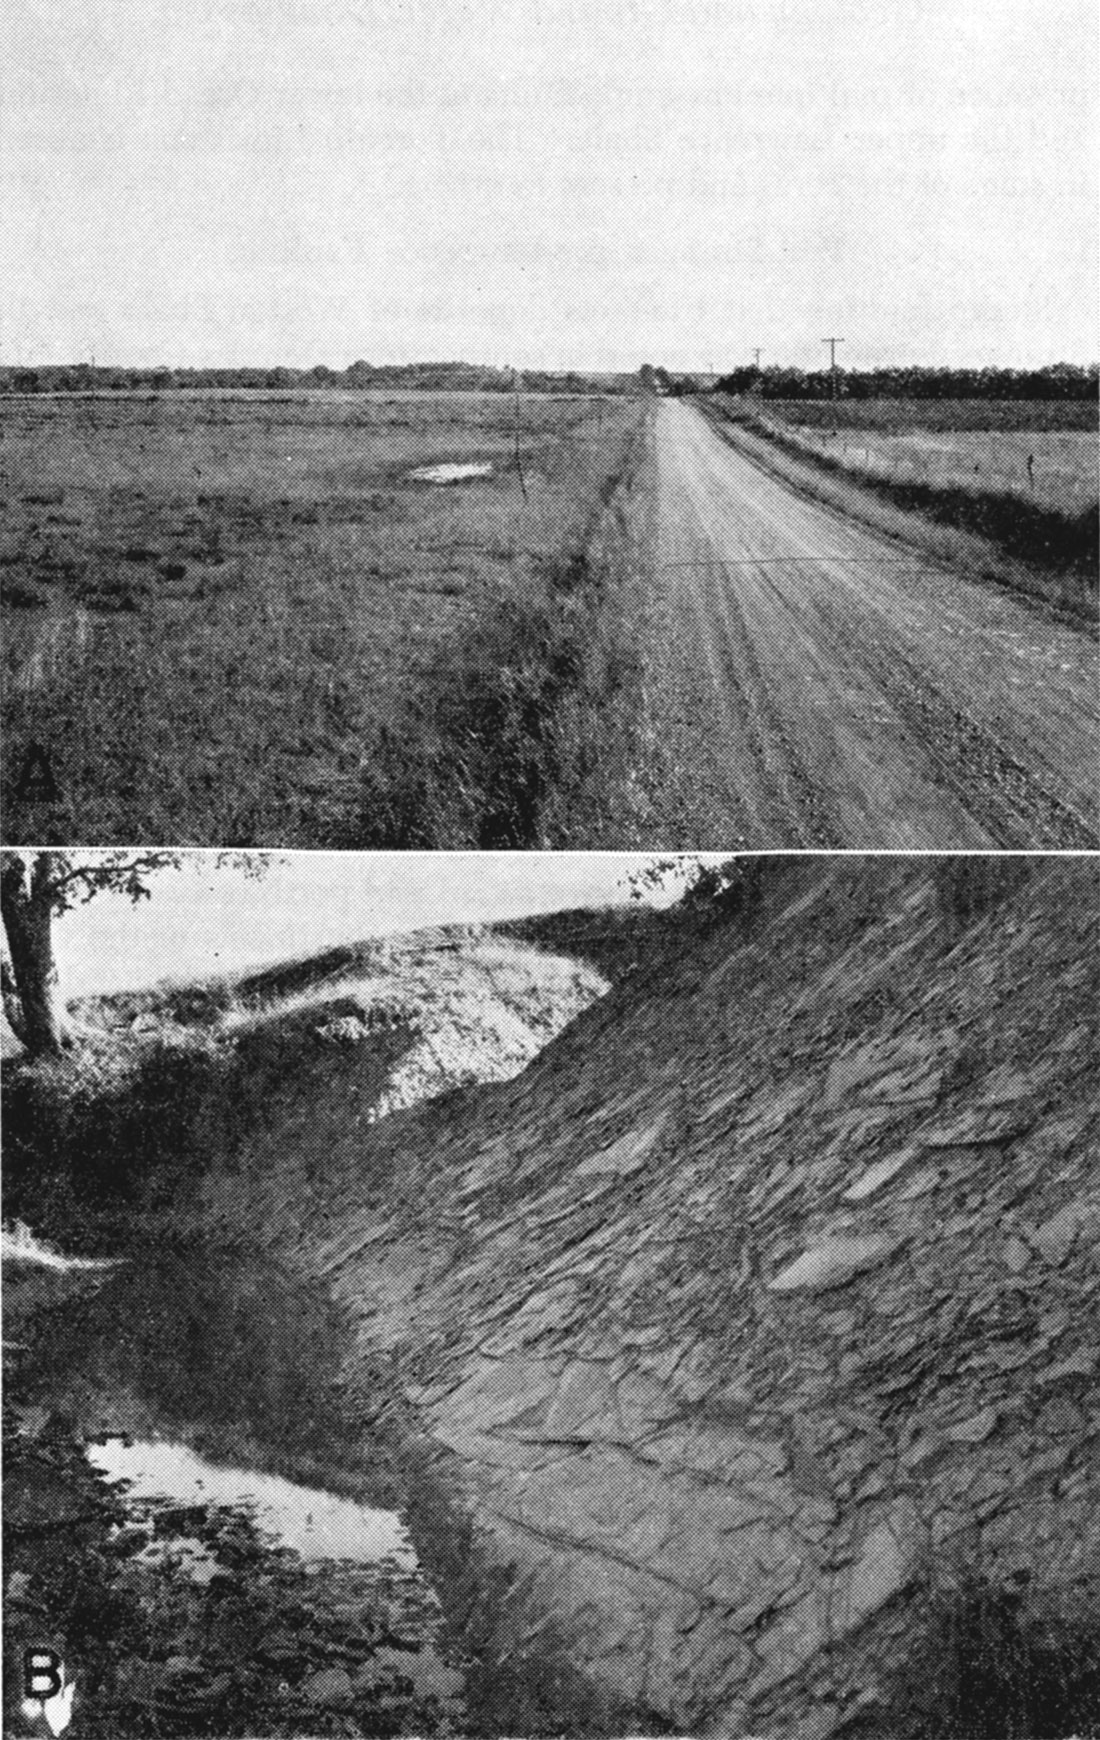 Two black and white photos; upper is of nearly circular small water-filled sinkhole developed in Plattsmouth Limestone member of the Oread Limestone along Worden fault; lower is of shale beds dipping 35 deg. E. in post-Stranger pre-Ireland fault block adjacent to channel containing Ireland Sandstone member of Lawrence Shale.